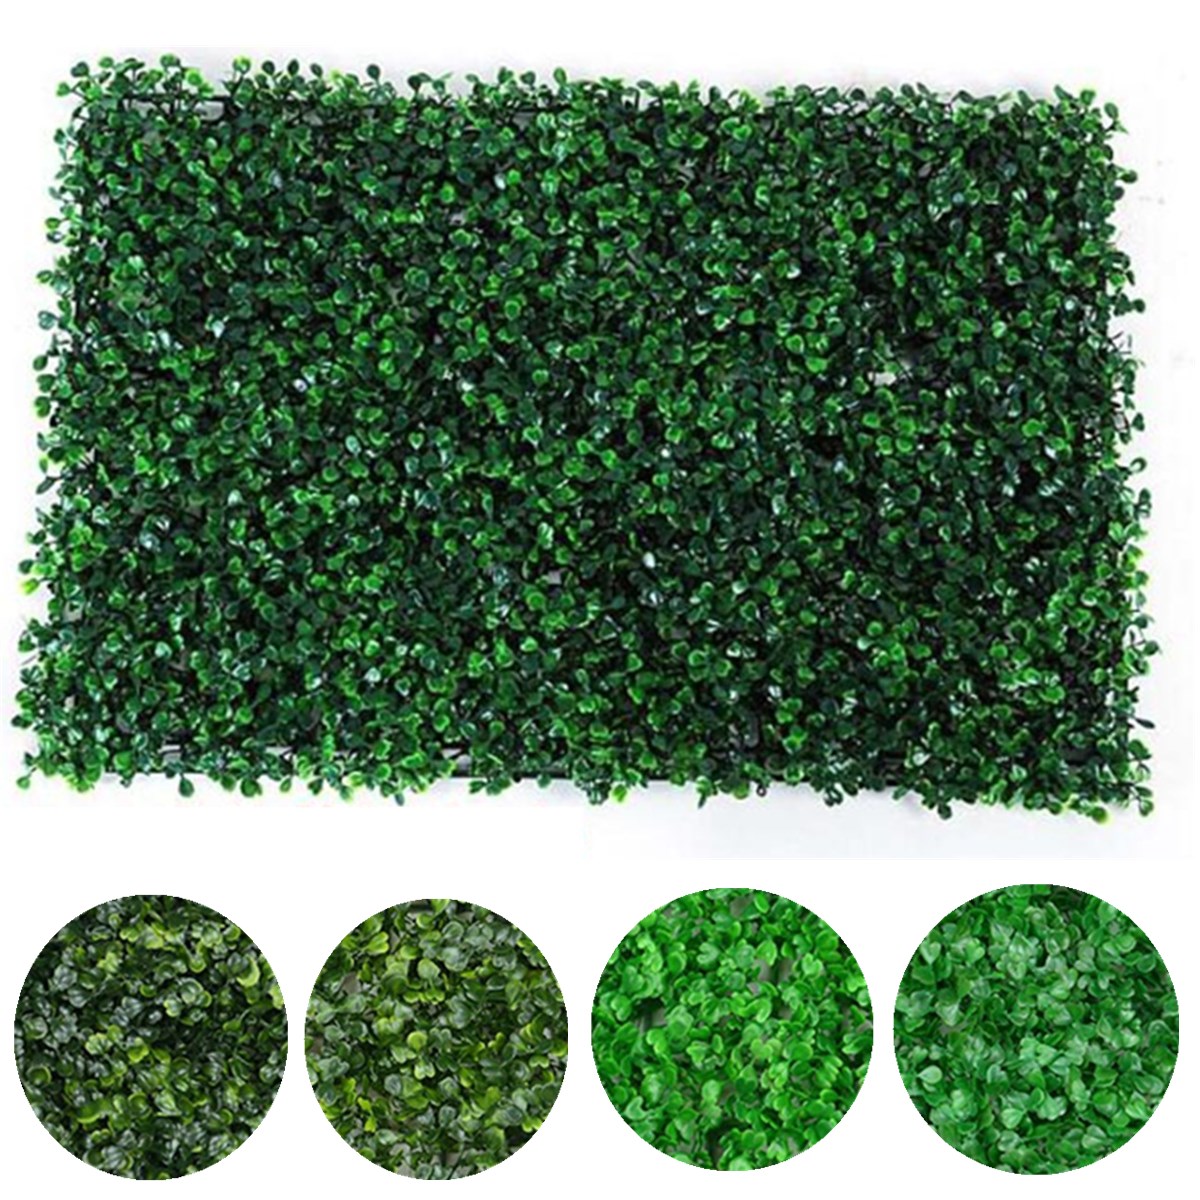 

40x60cm Artificial Plant Wall Fence Vertical Garden Panel Decorations Foliage Hedge